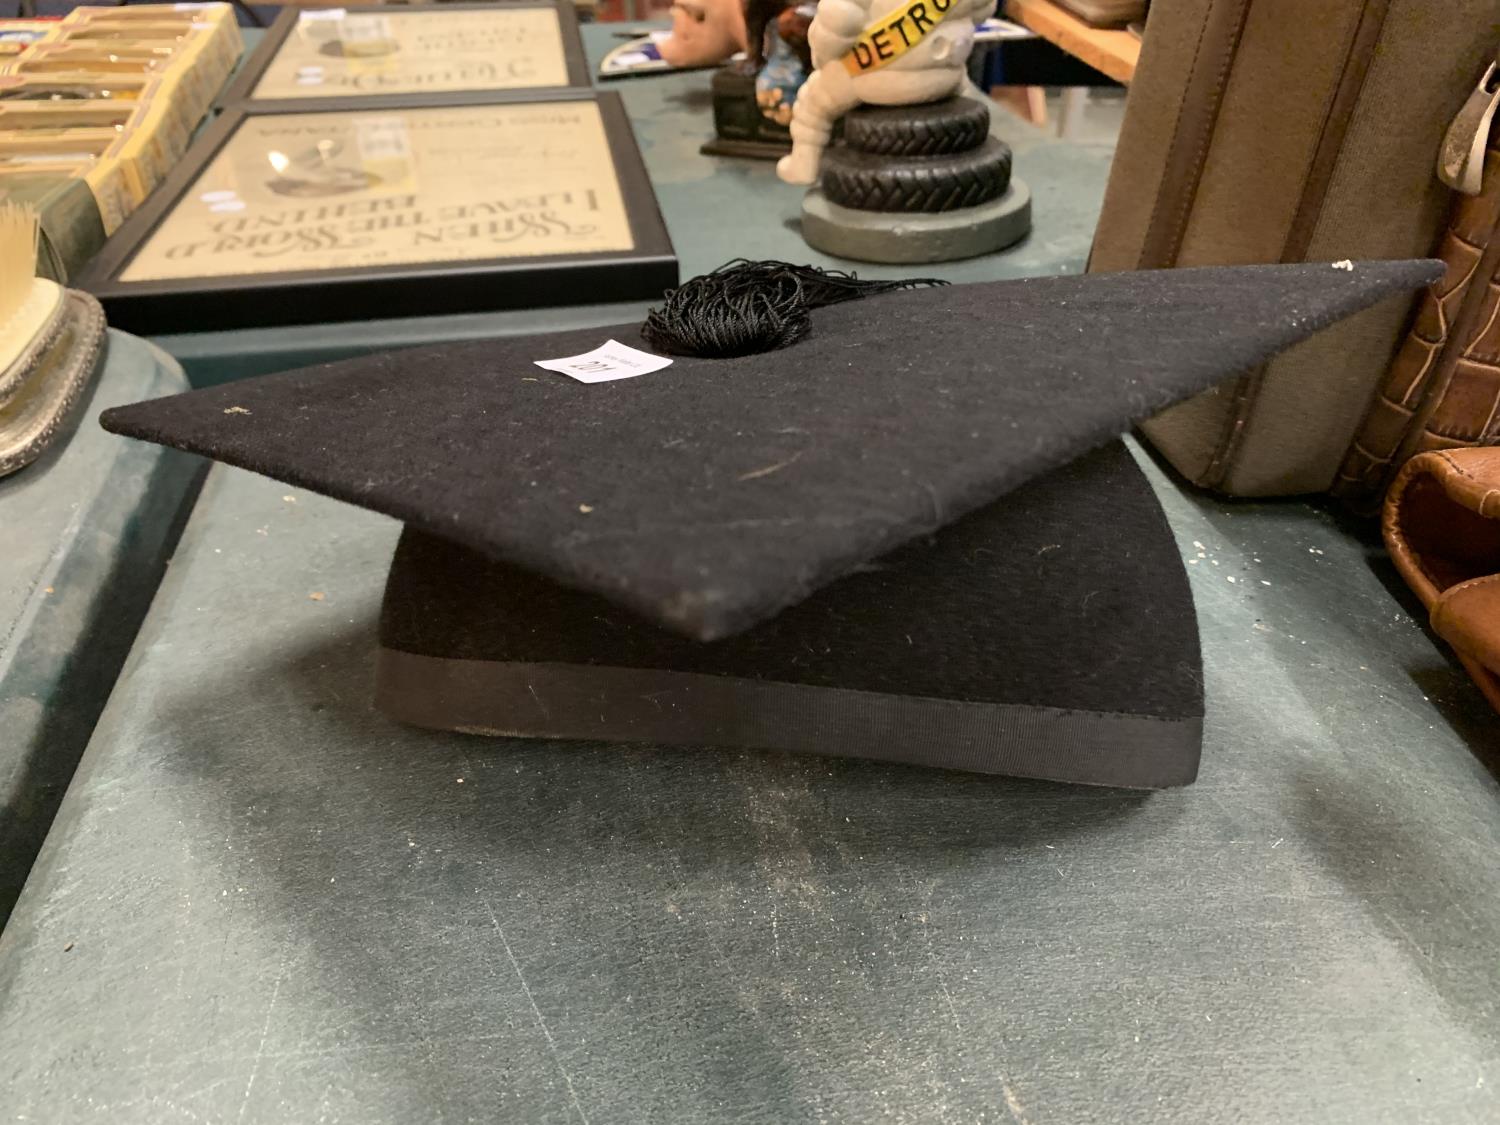 AN 'EDE AND RAVENSCROFT LIMITED' MORTAR BOARD